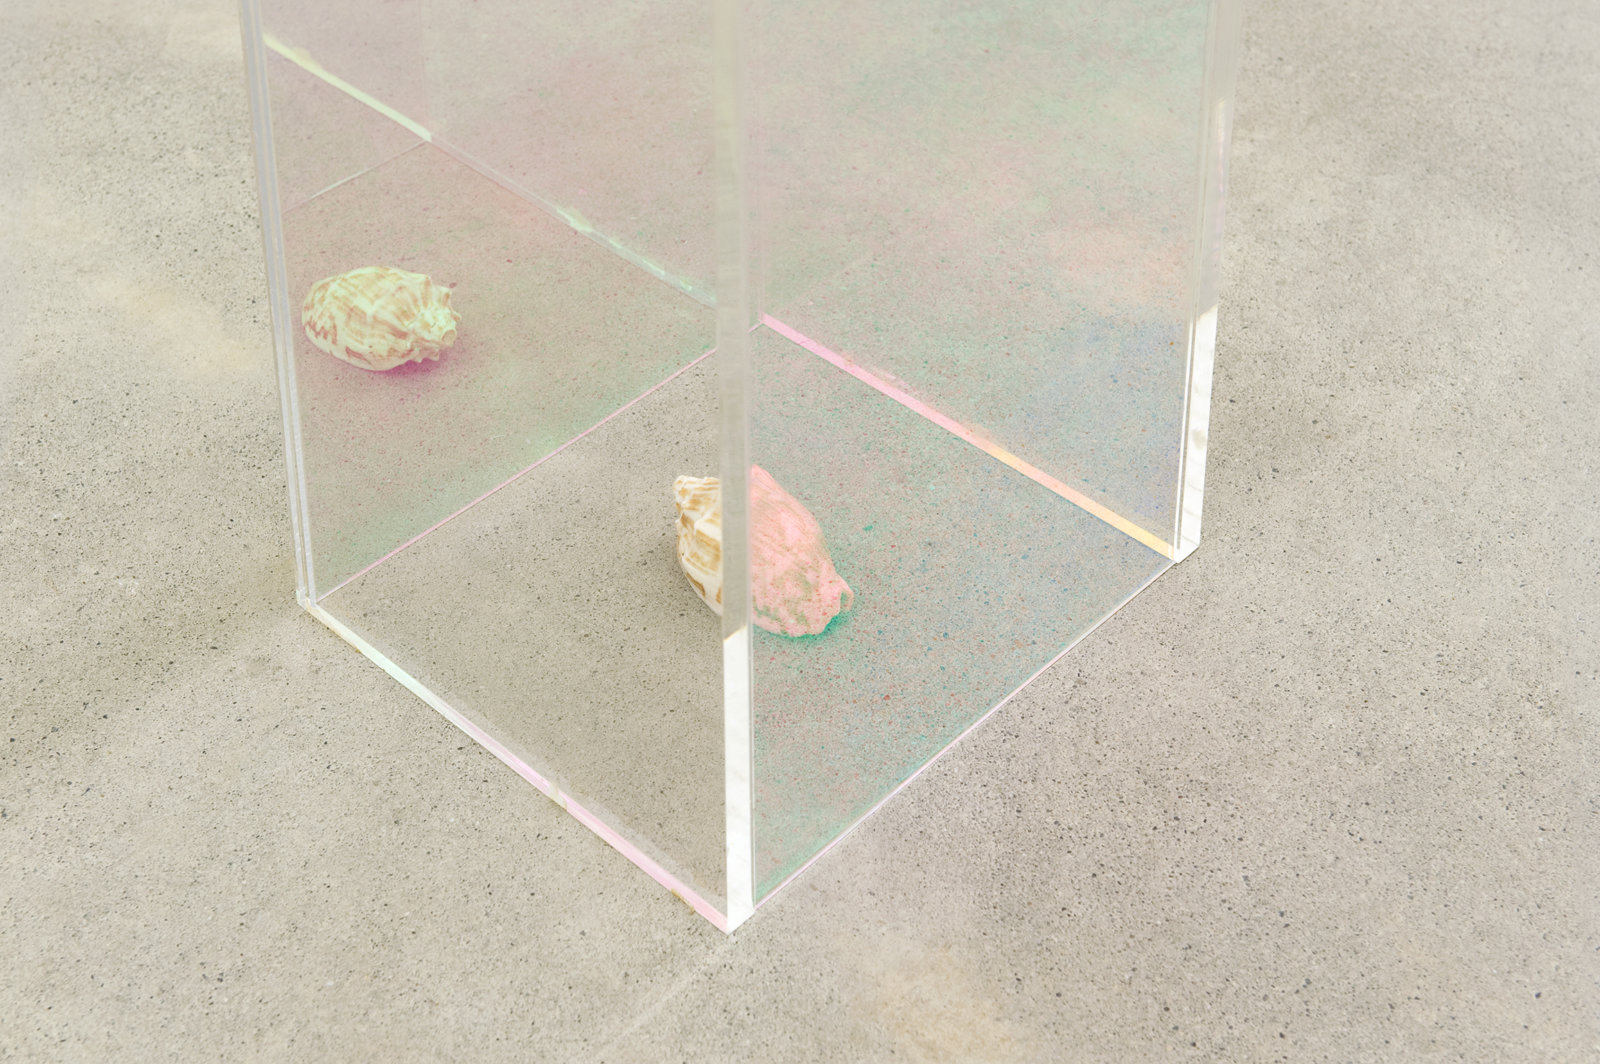 Judy Radul, Women and Film (detail), 2011, dichroic and clear acrylic, copy of Wide Angle magazine (vol. 6, no. 3, special issue on Feminism and Film, 1984), seashell, 60 x 8 x 9 in. (152 x 20 x 23 cm)